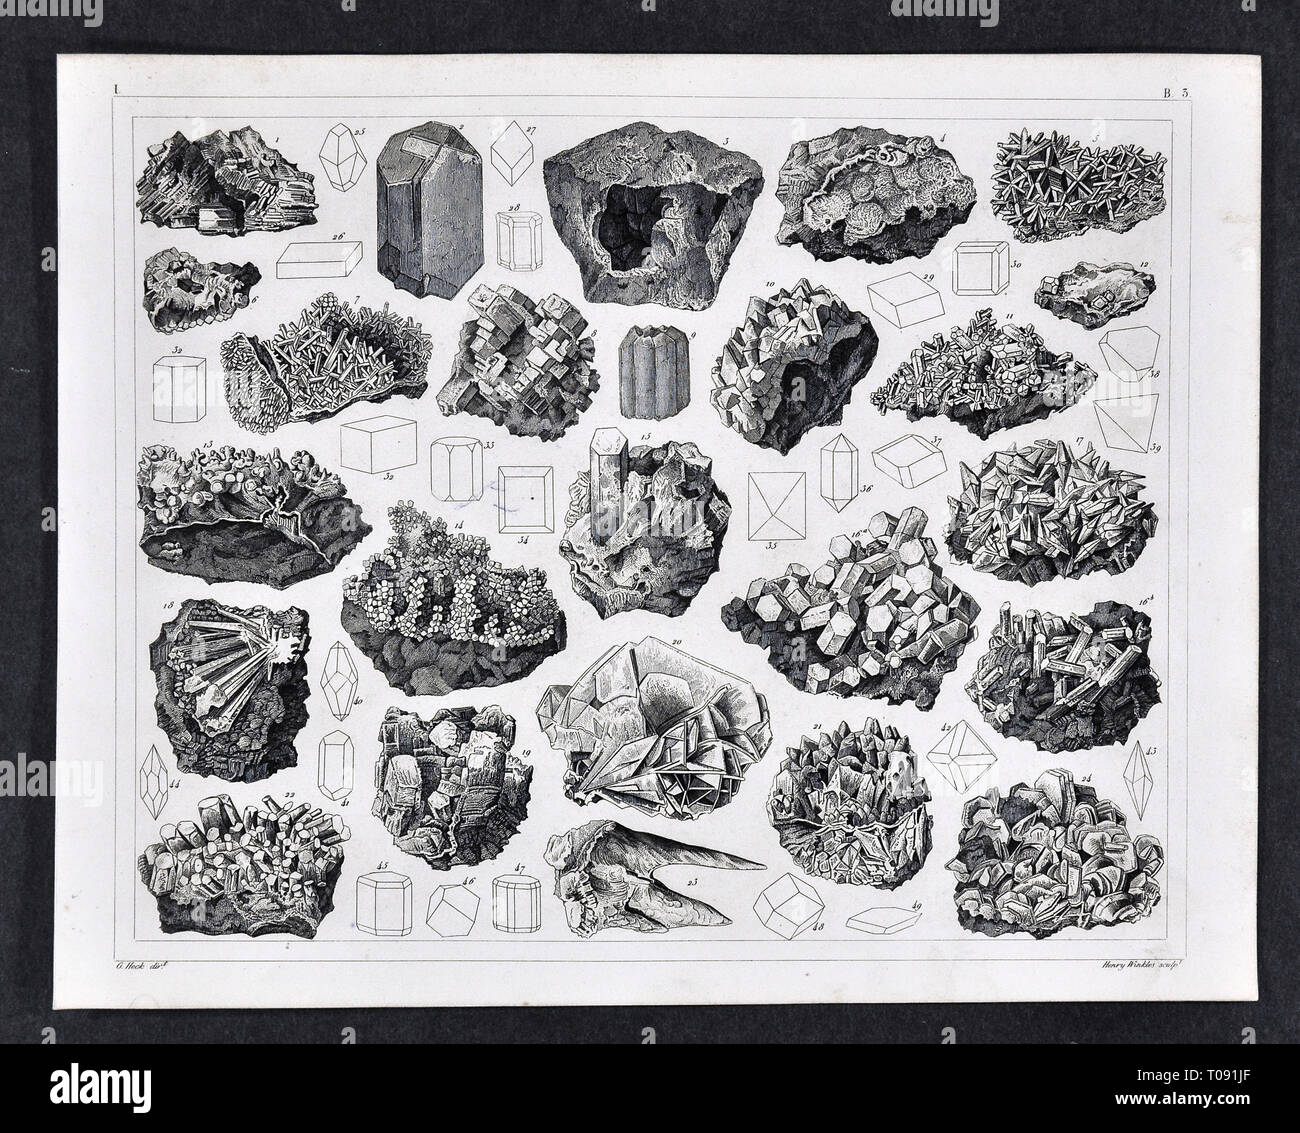 1849 Bilder Geological Print of Rocks and Minerals showing various Crystal System Formations Stock Photo